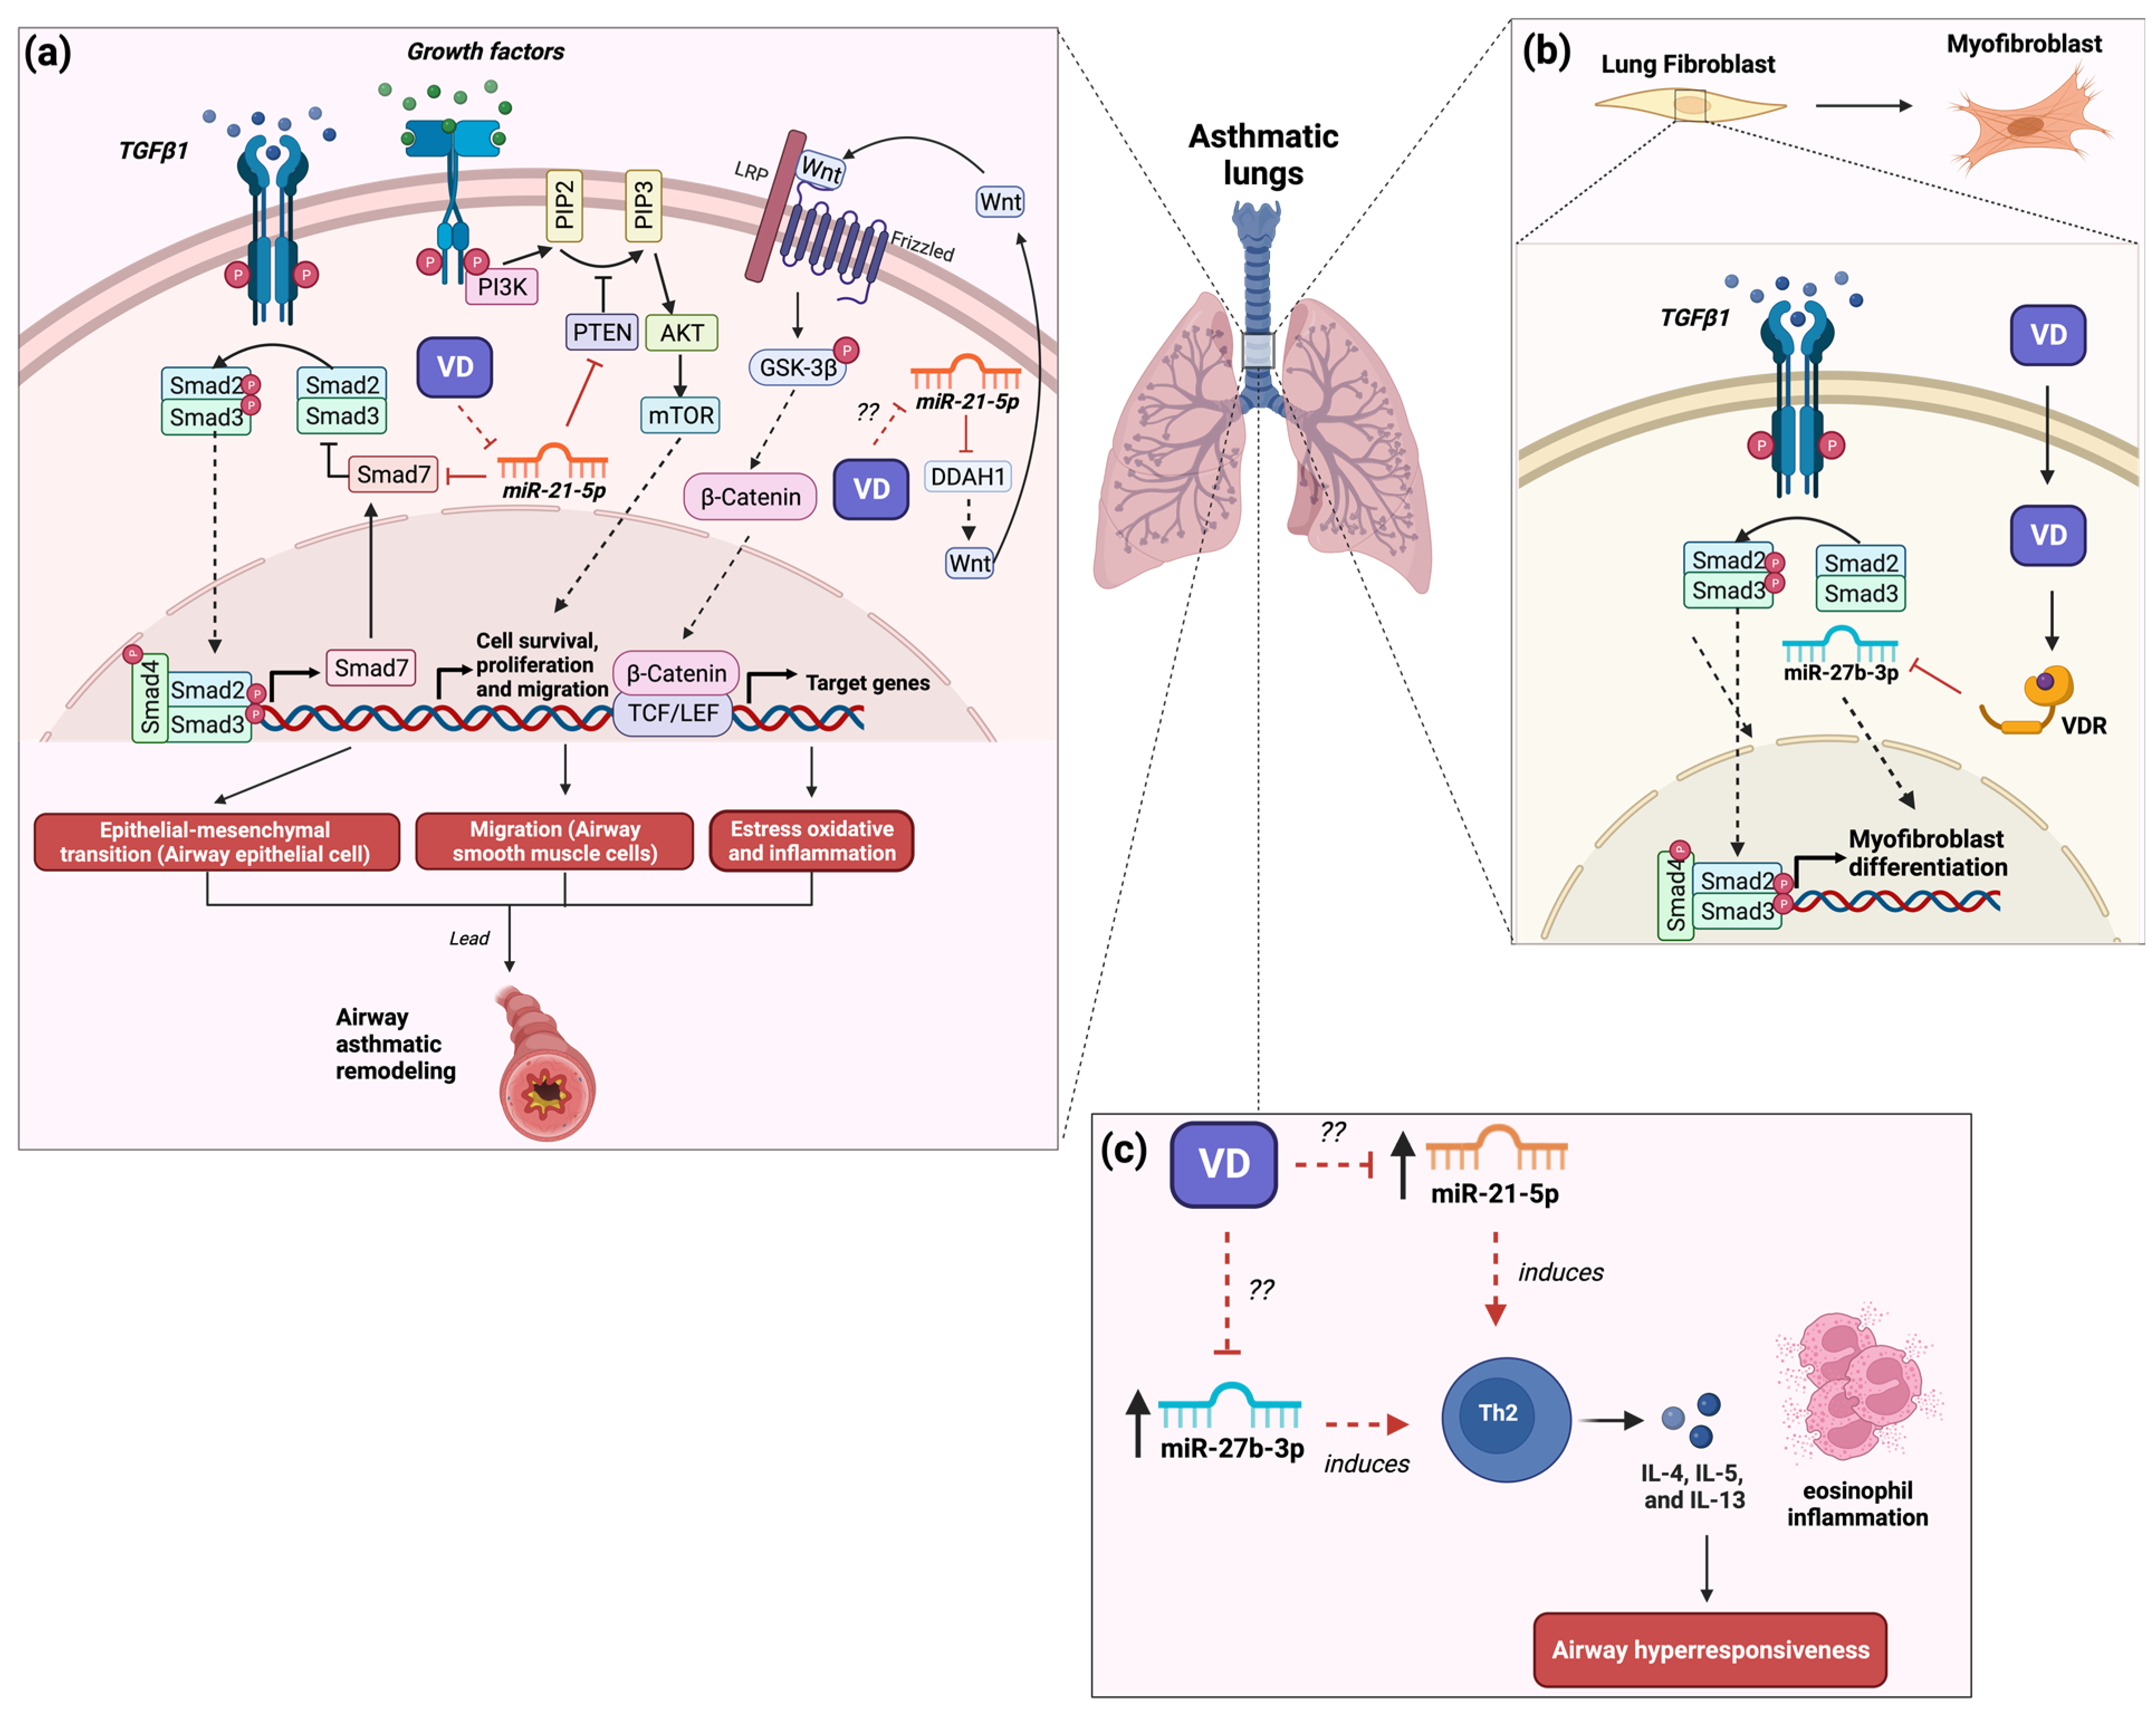 Nutrients | Free Full-Text | The Roles of MicroRNAs in Asthma and 